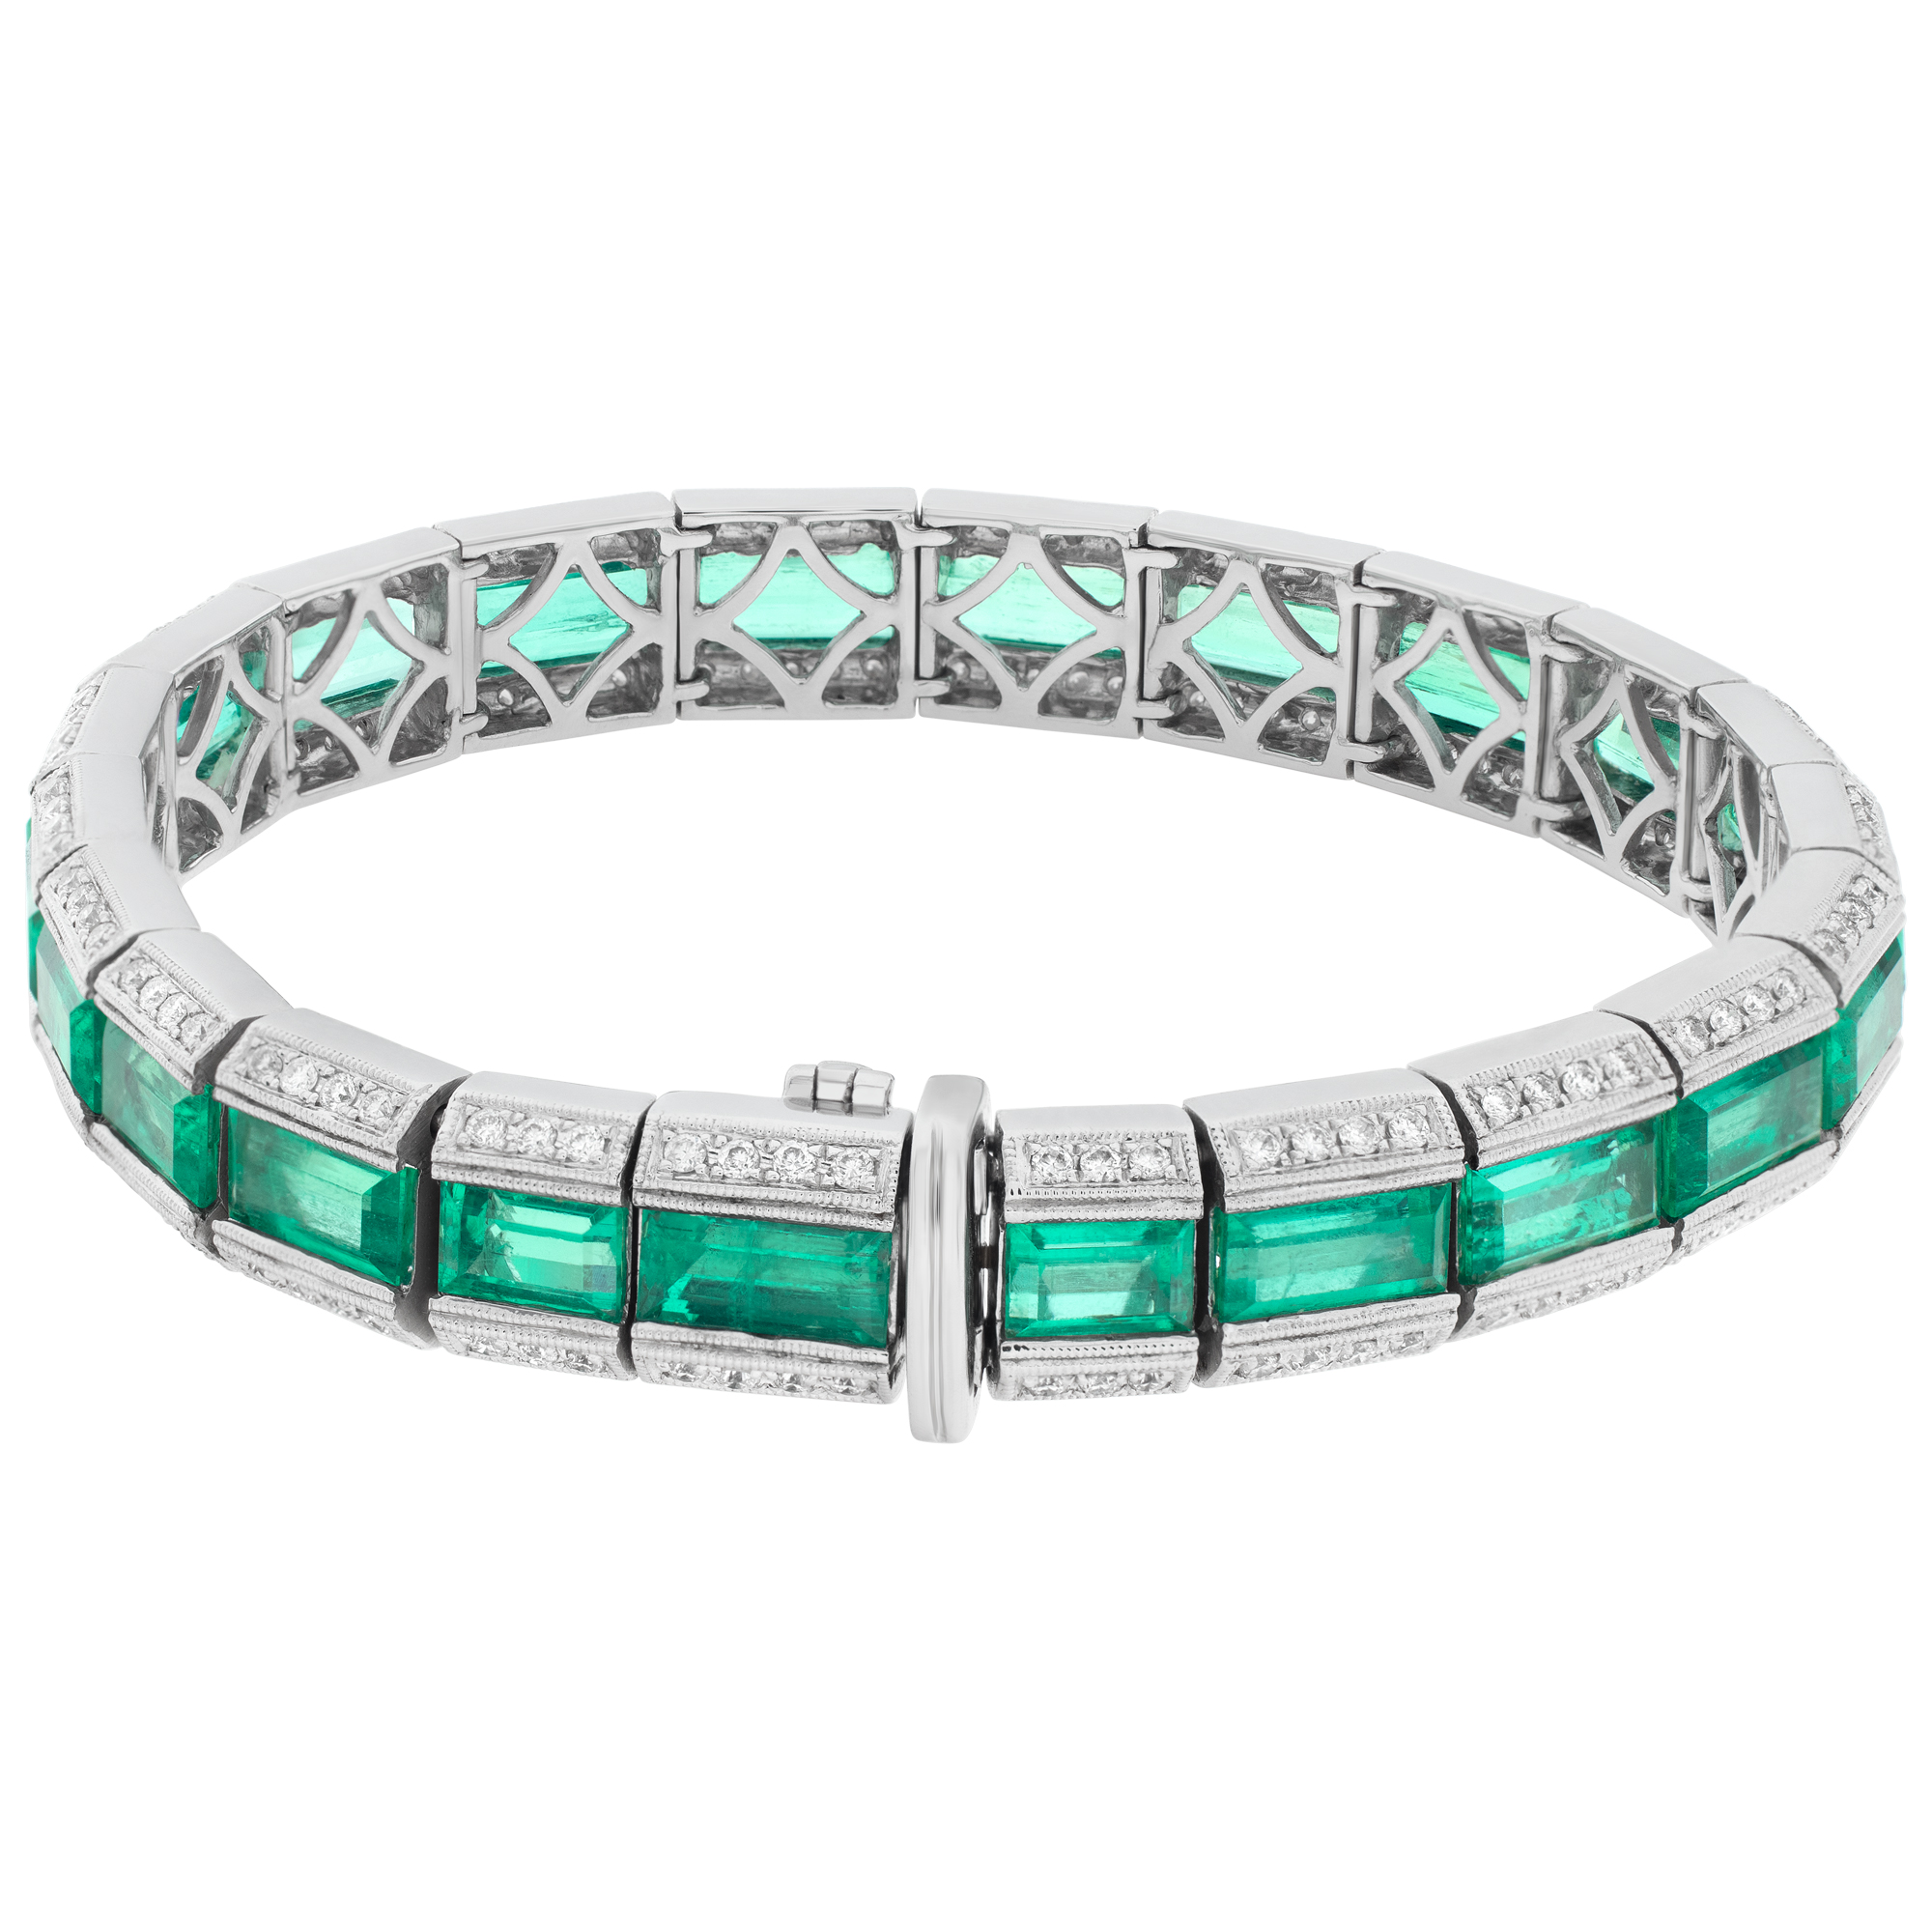 Colombian emerald cut emerald and diamond line bracelet set in 18K white gold. image 2